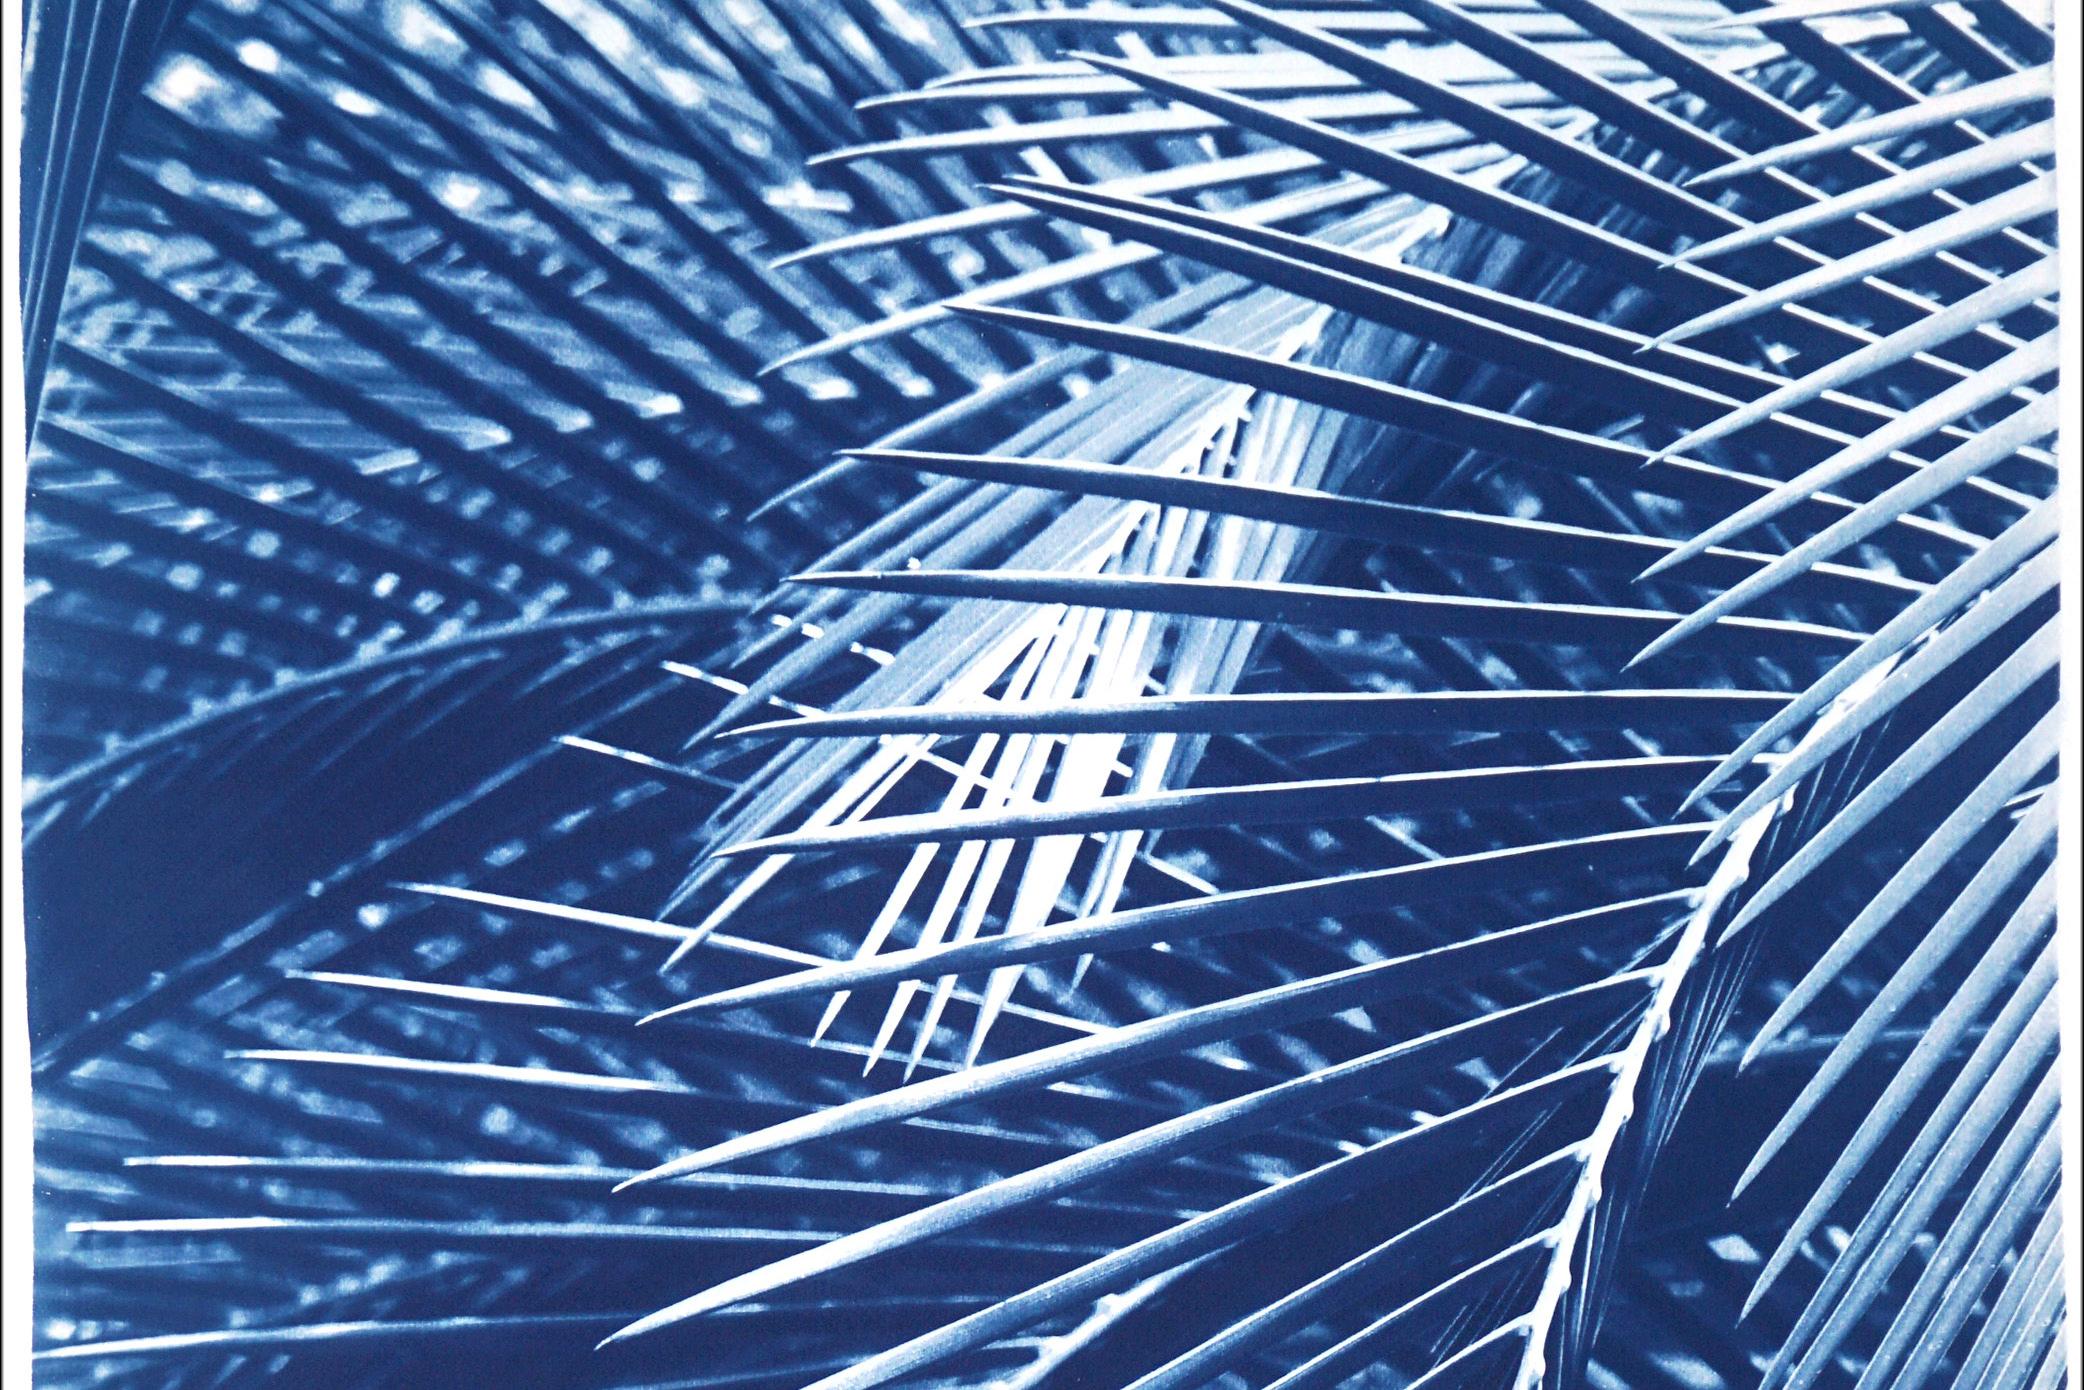 Lush Palm Bushes, Botanical Diptych, Still Life in Blue Tones, Tropical Style - Naturalistic Print by Kind of Cyan